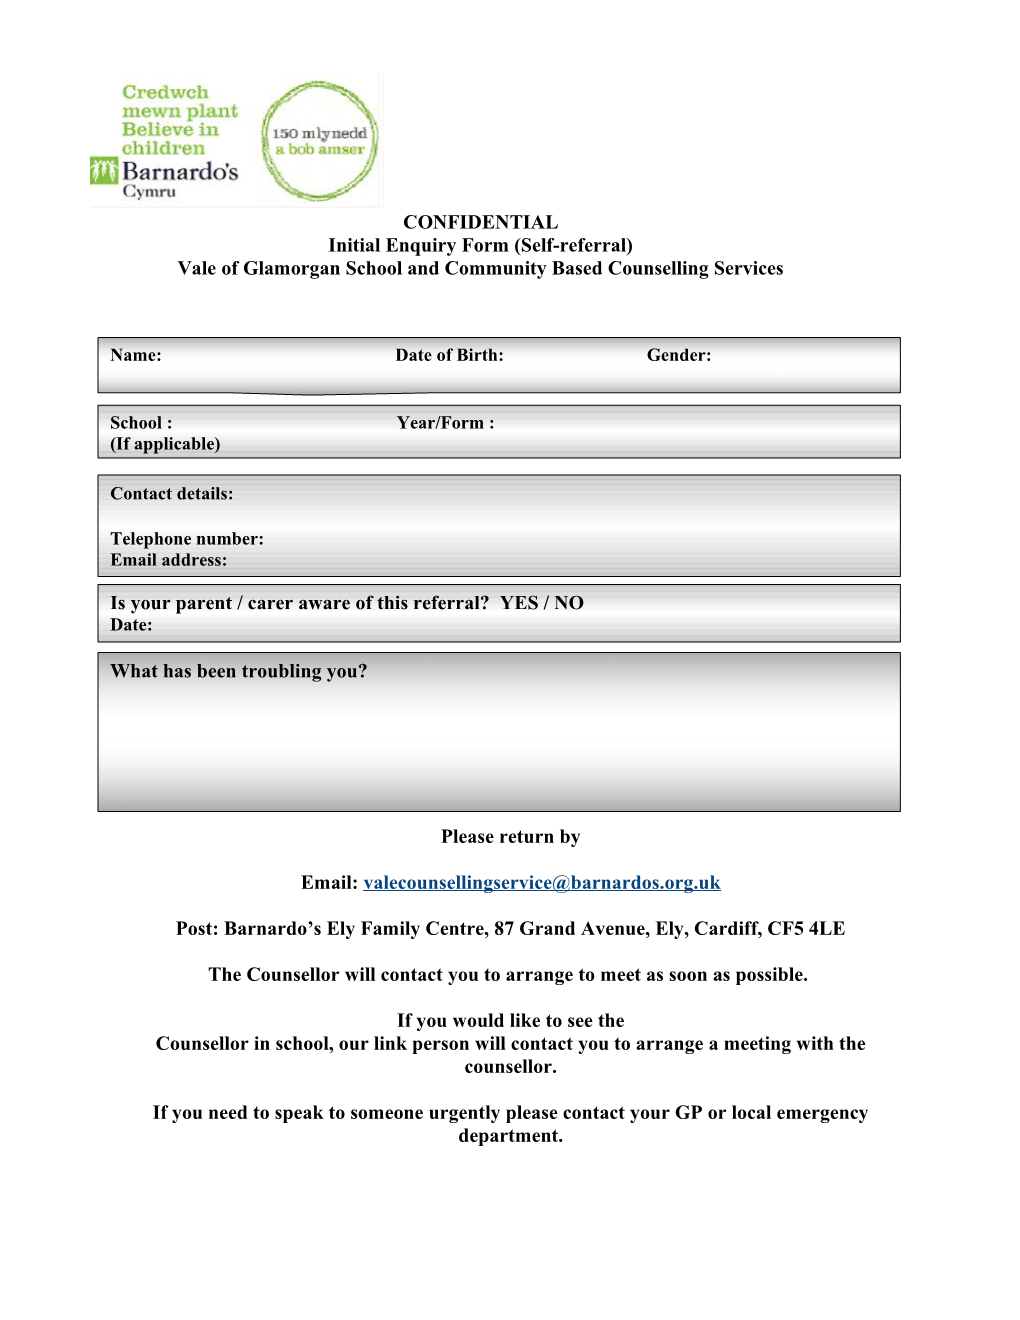 Barnardo's Initial Enquiry Form Vale- Self Referral (With Attachment)